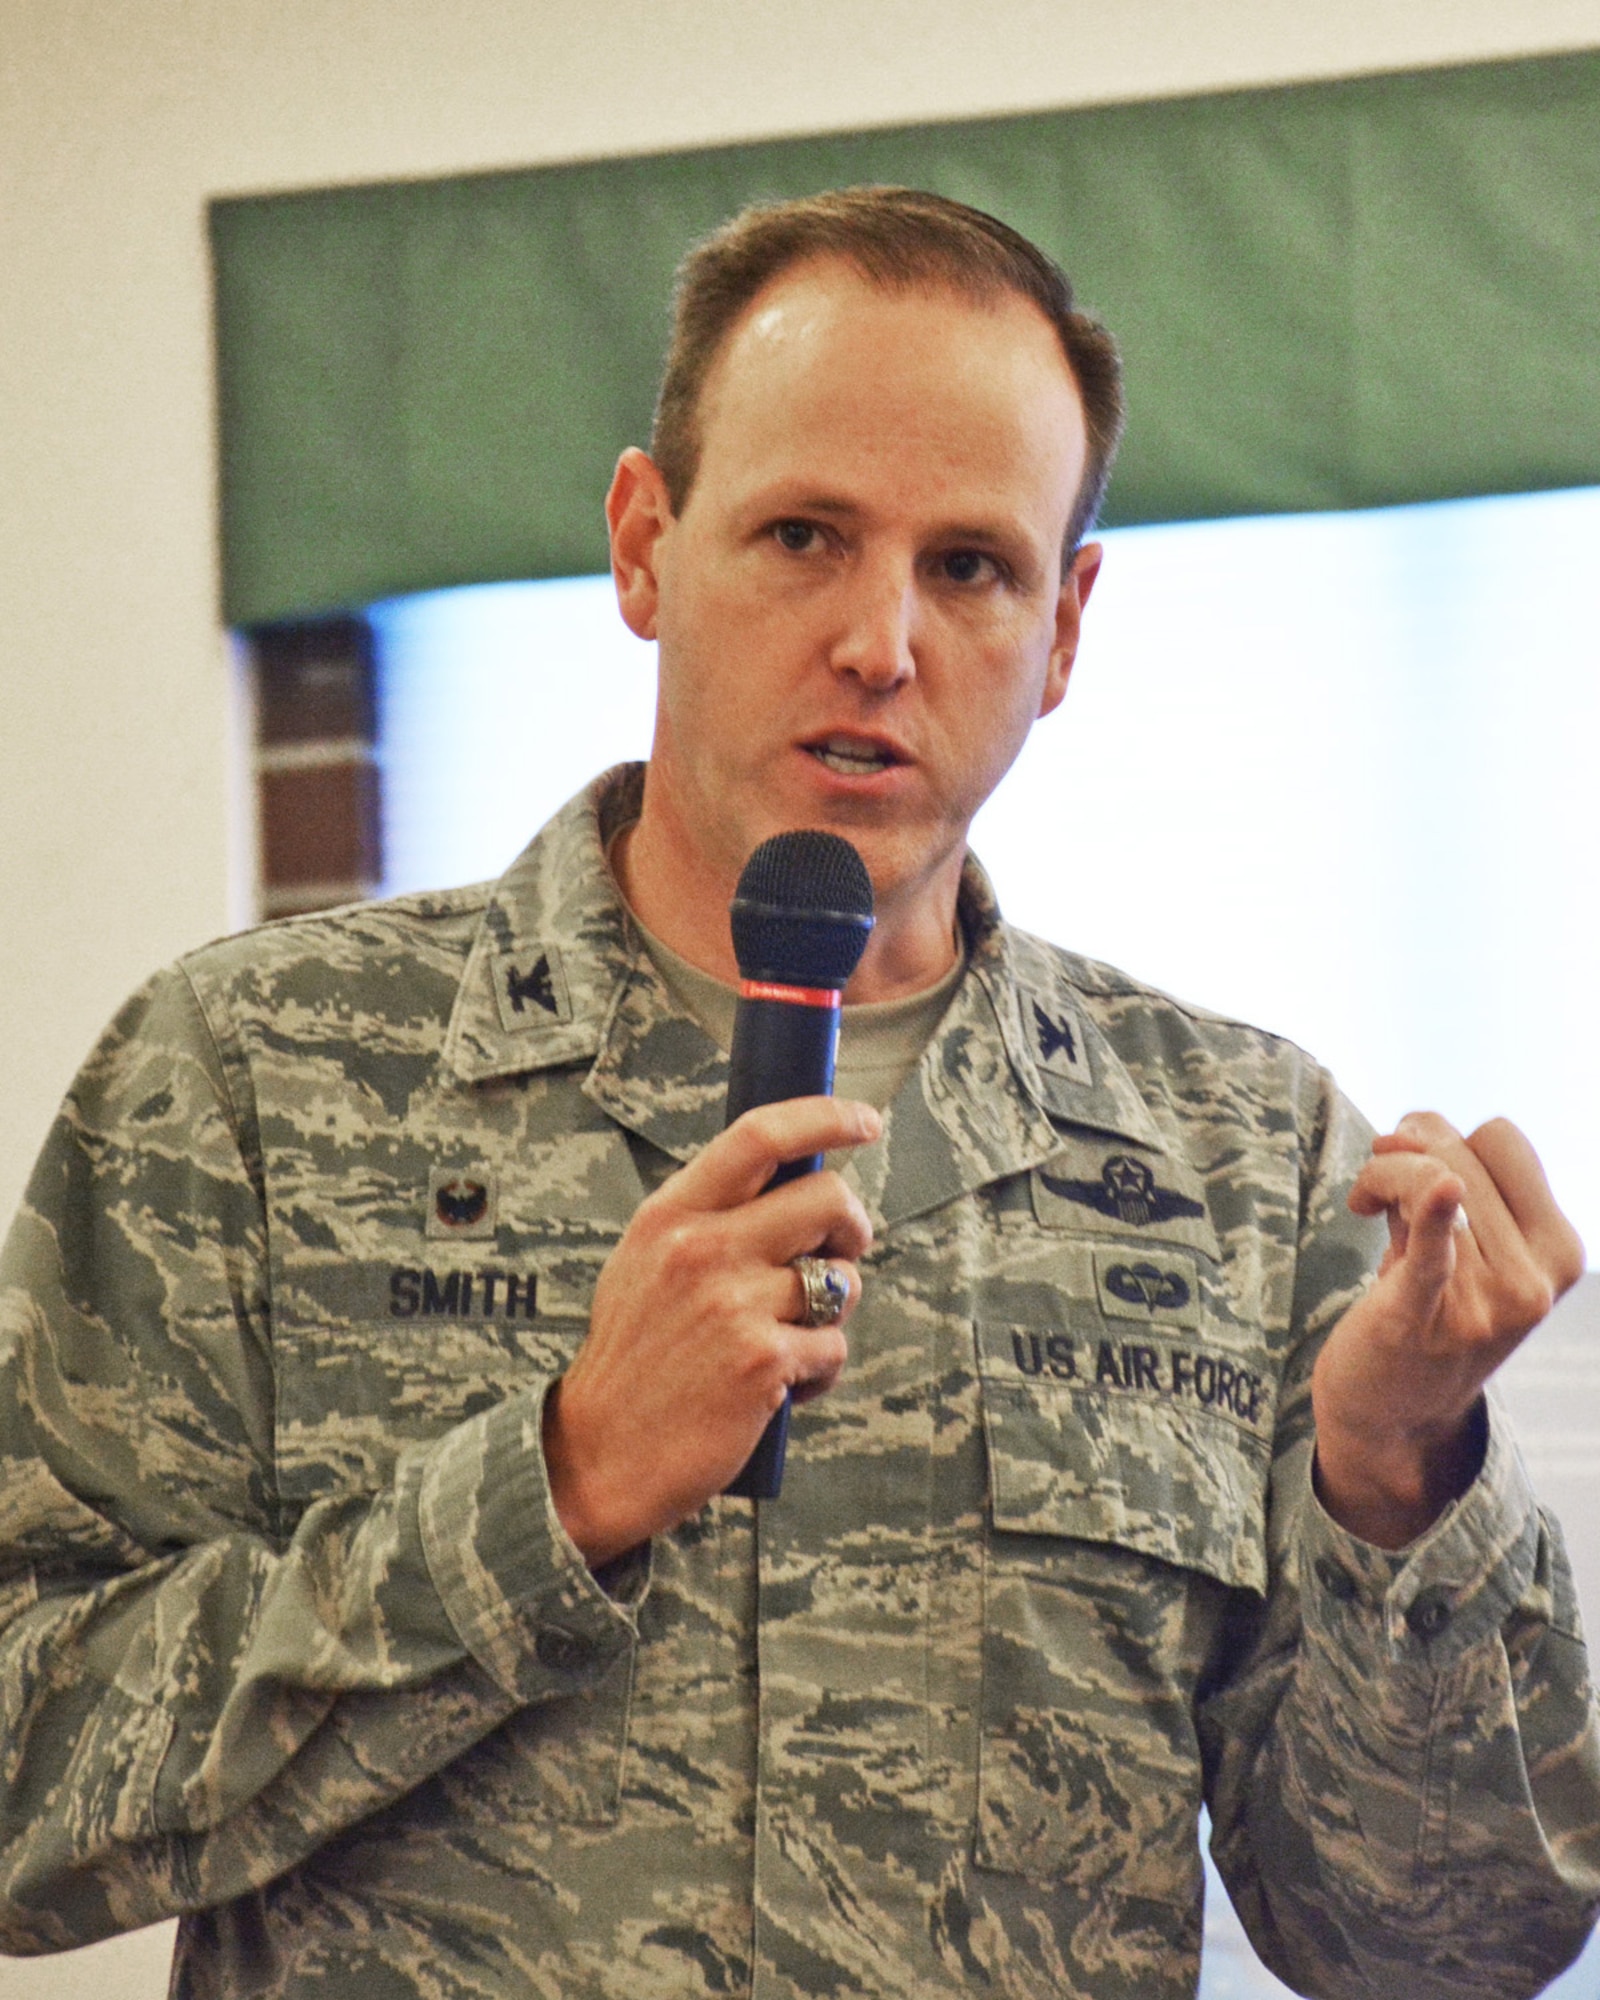 120th Airlift Commander Col. Lee Smith discusses the importance of awards and decorations during his fourth scheduled lunch and learn event for Airmen held in the 120th AW Dining Facility on the base in Great Falls, Mont. November 6, 2016. (U.S. Air National Guard photo by Senior Master Sgt. Eric Peterson)